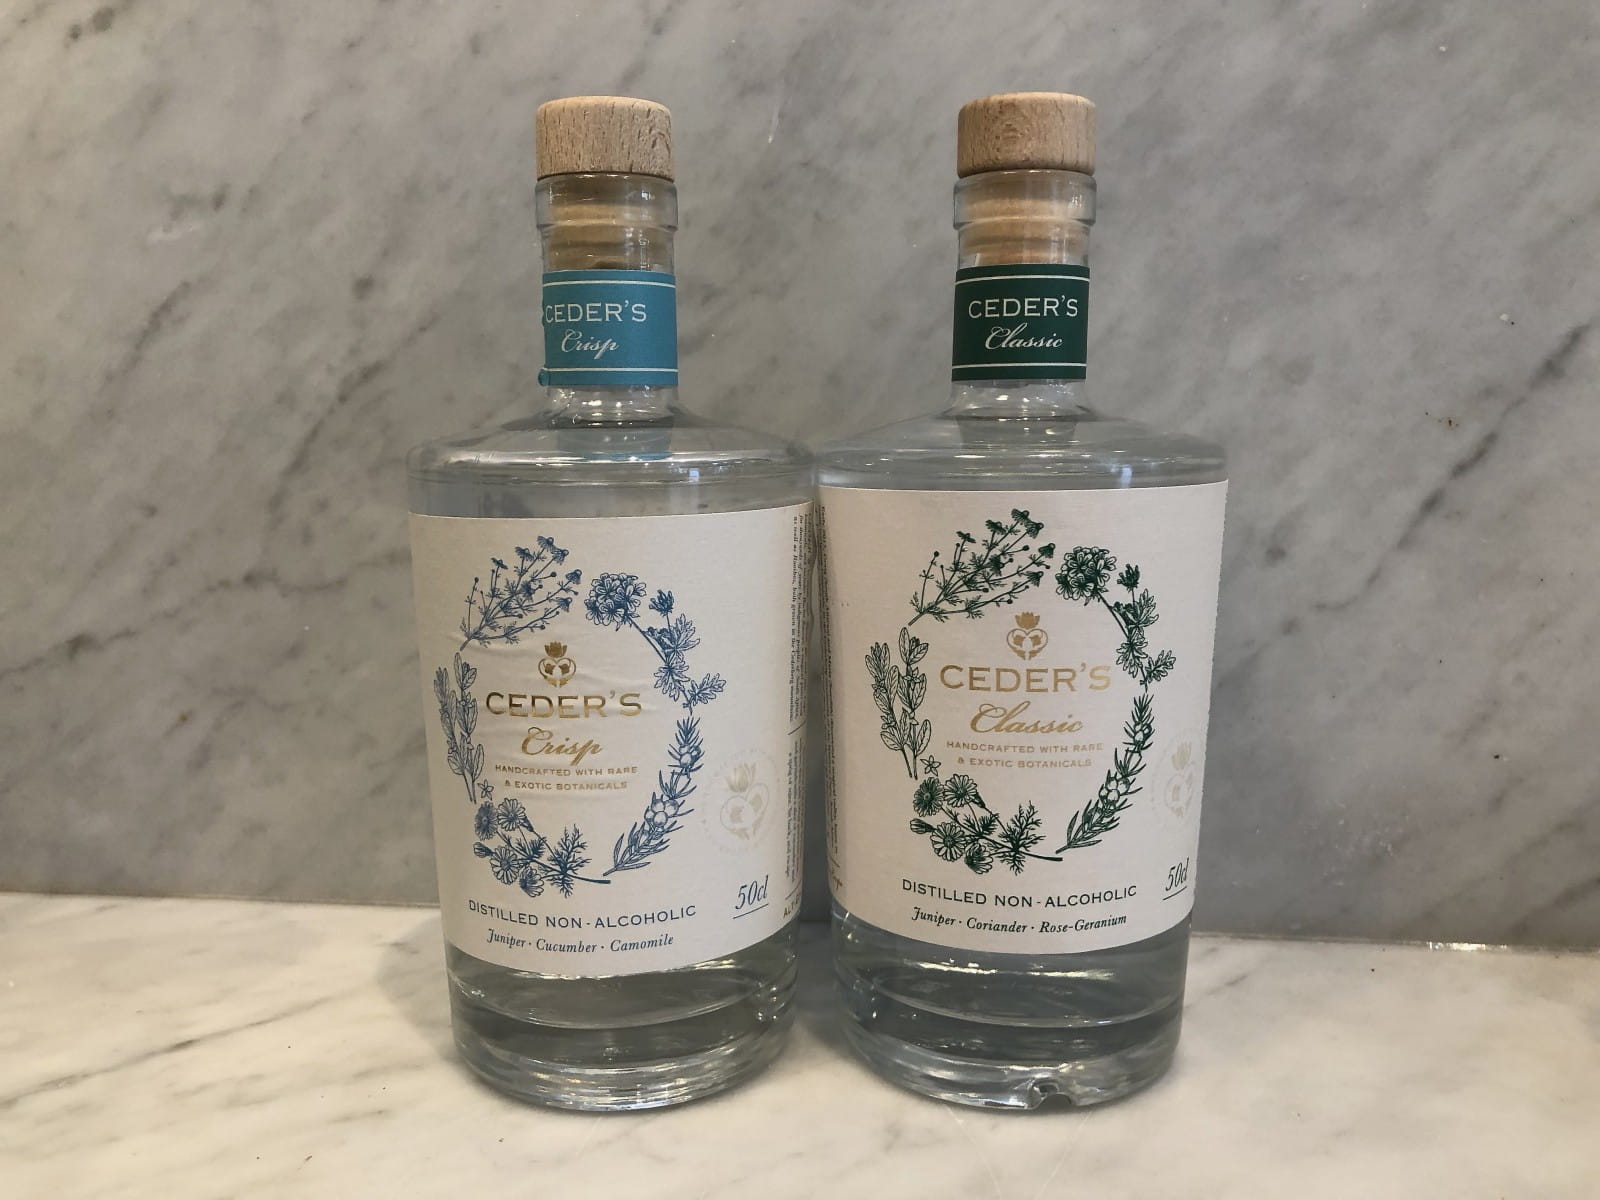 CEDER’S alcohol-free ‘gin’